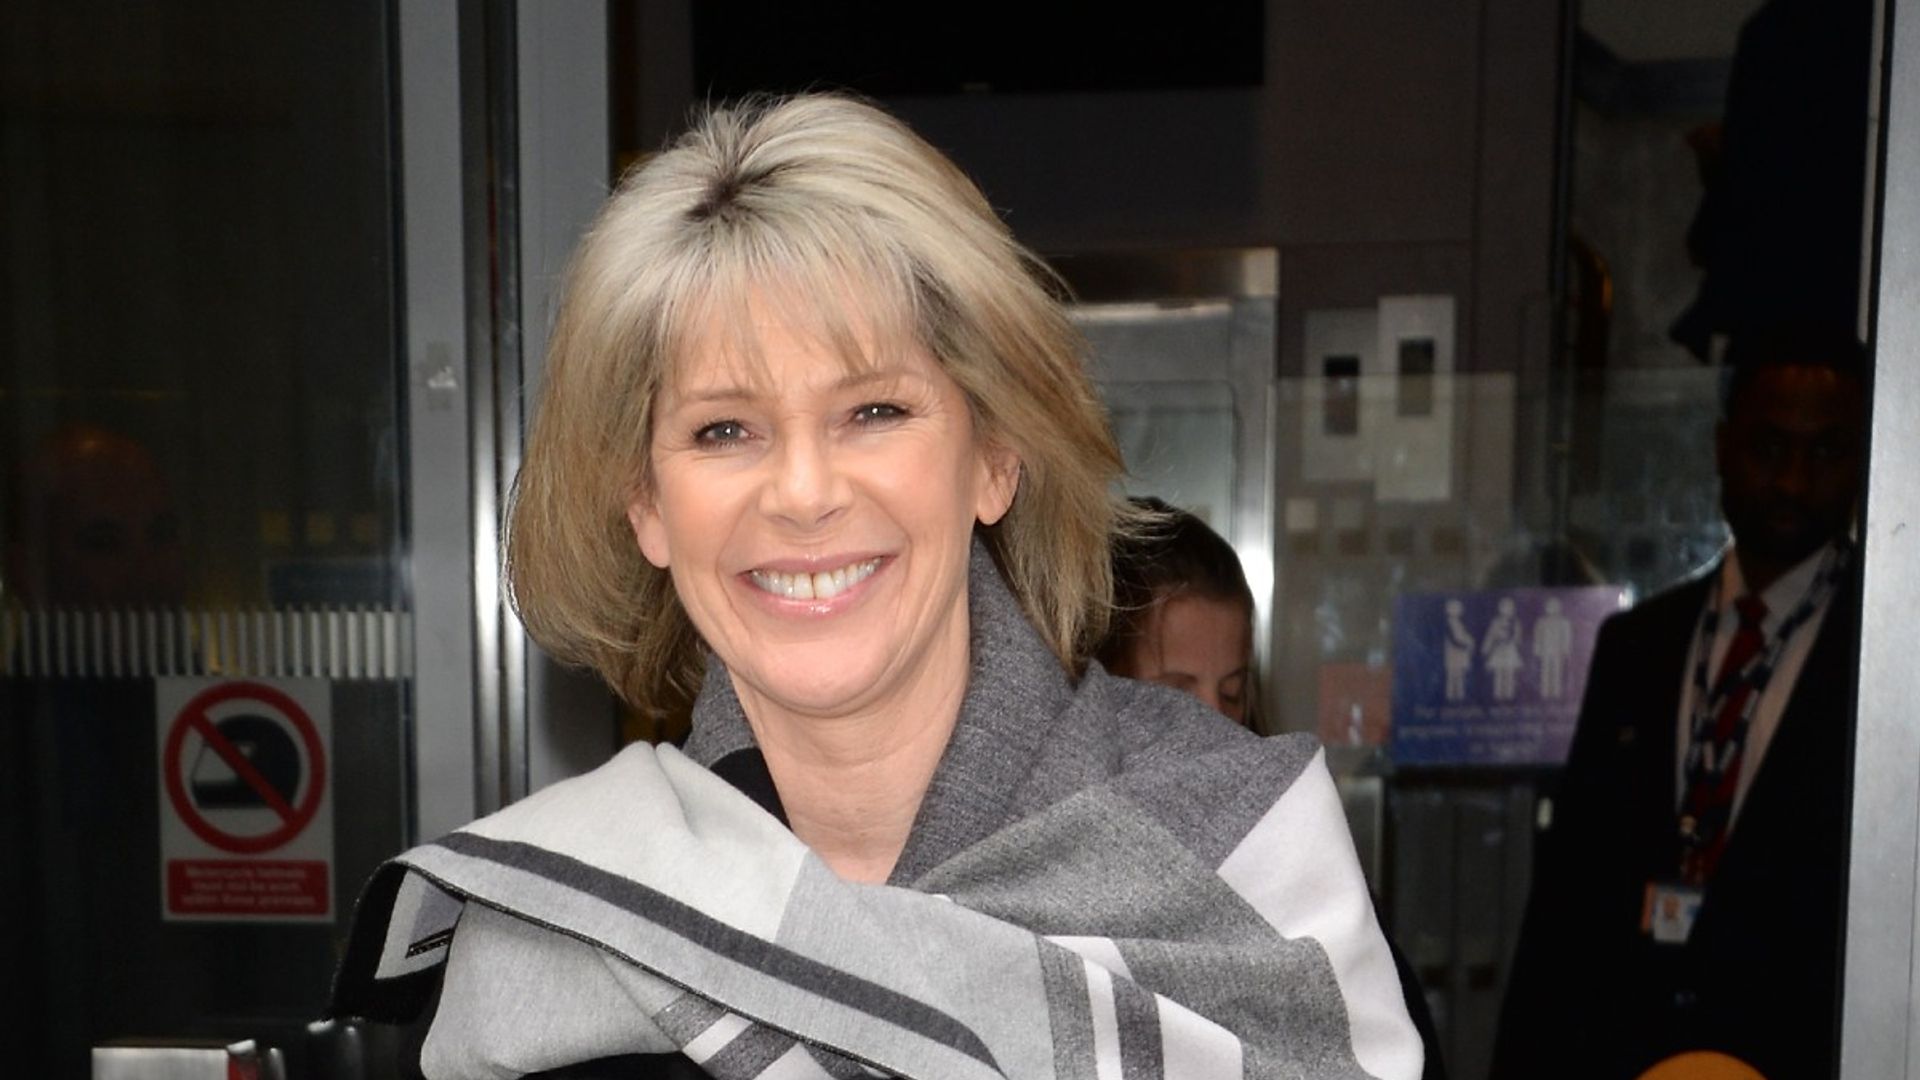 Ruth Langsford smiling as she walks out of a building